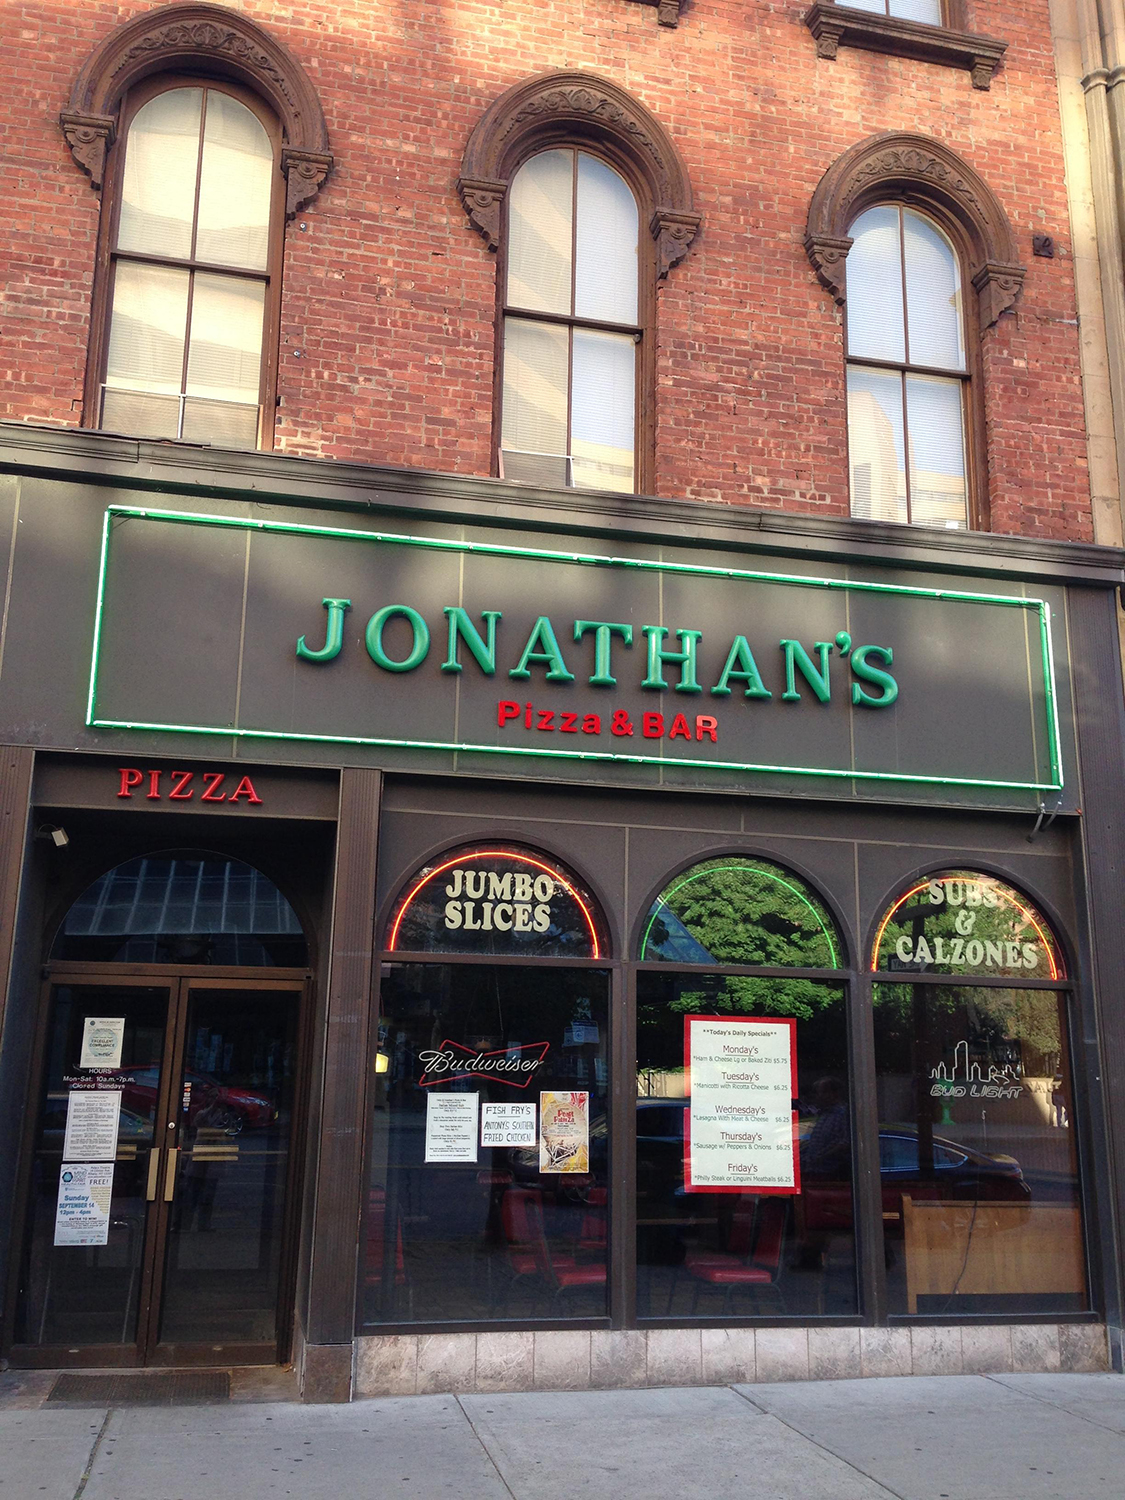 Jonathan’s Pizza sign on building front